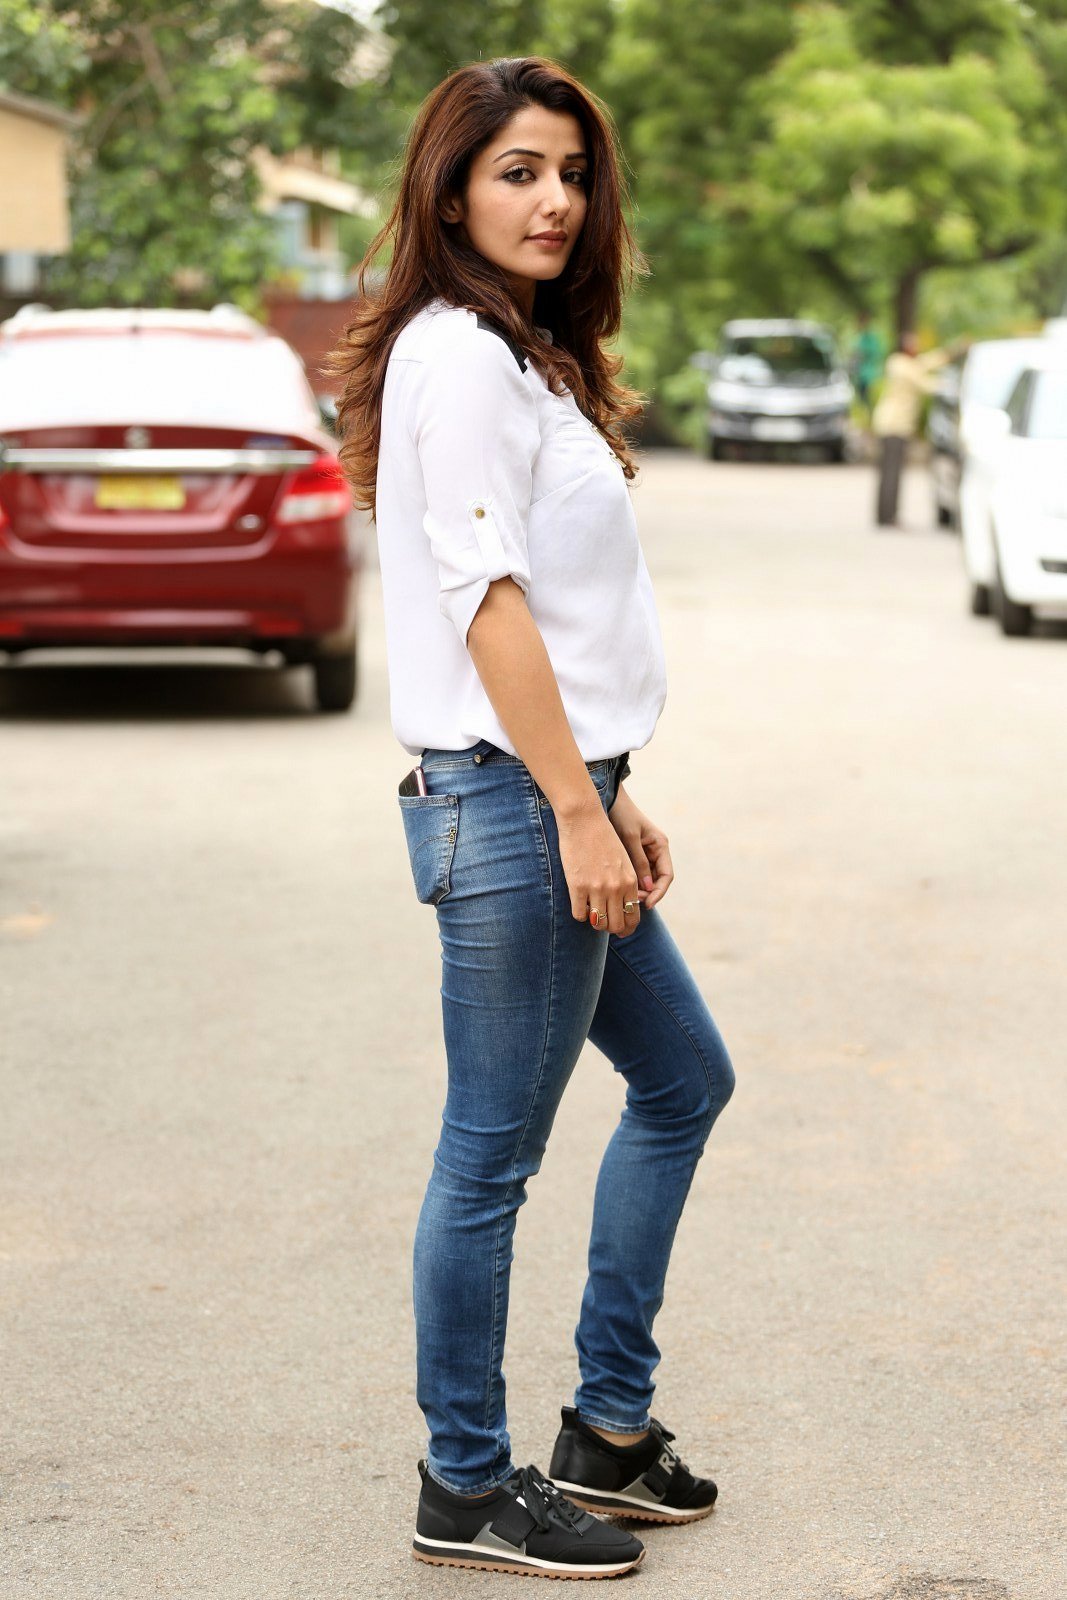 Sonia Mann At Dr Chakravarthy Movie Interview | Picture 1518520